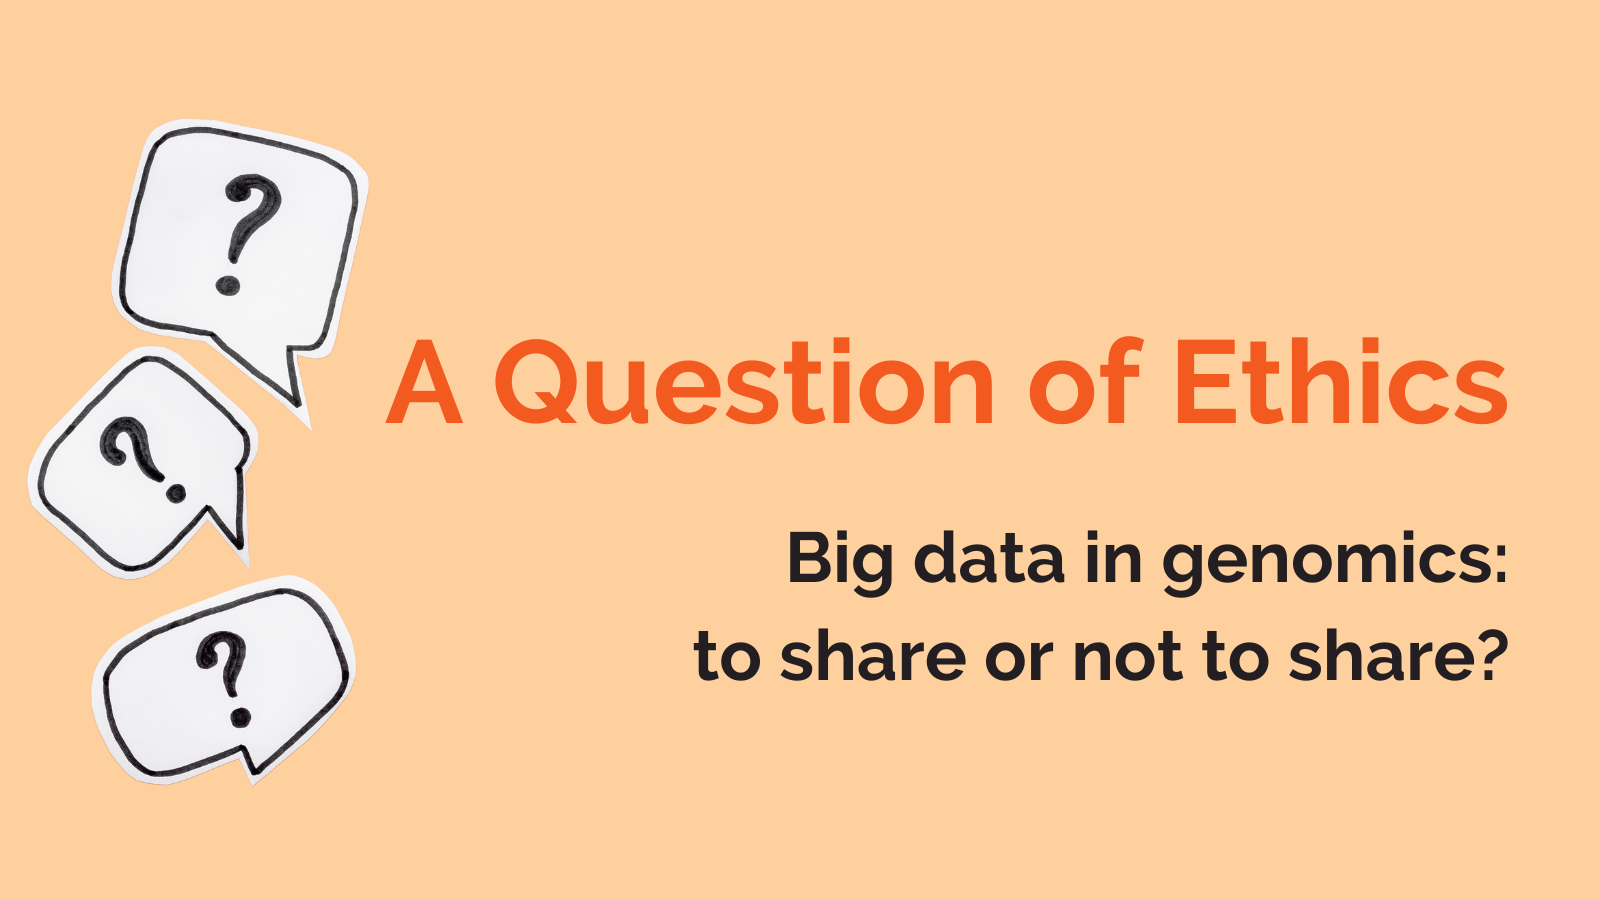 A Question of Ethics - Big data in genomics: to share or not to share?